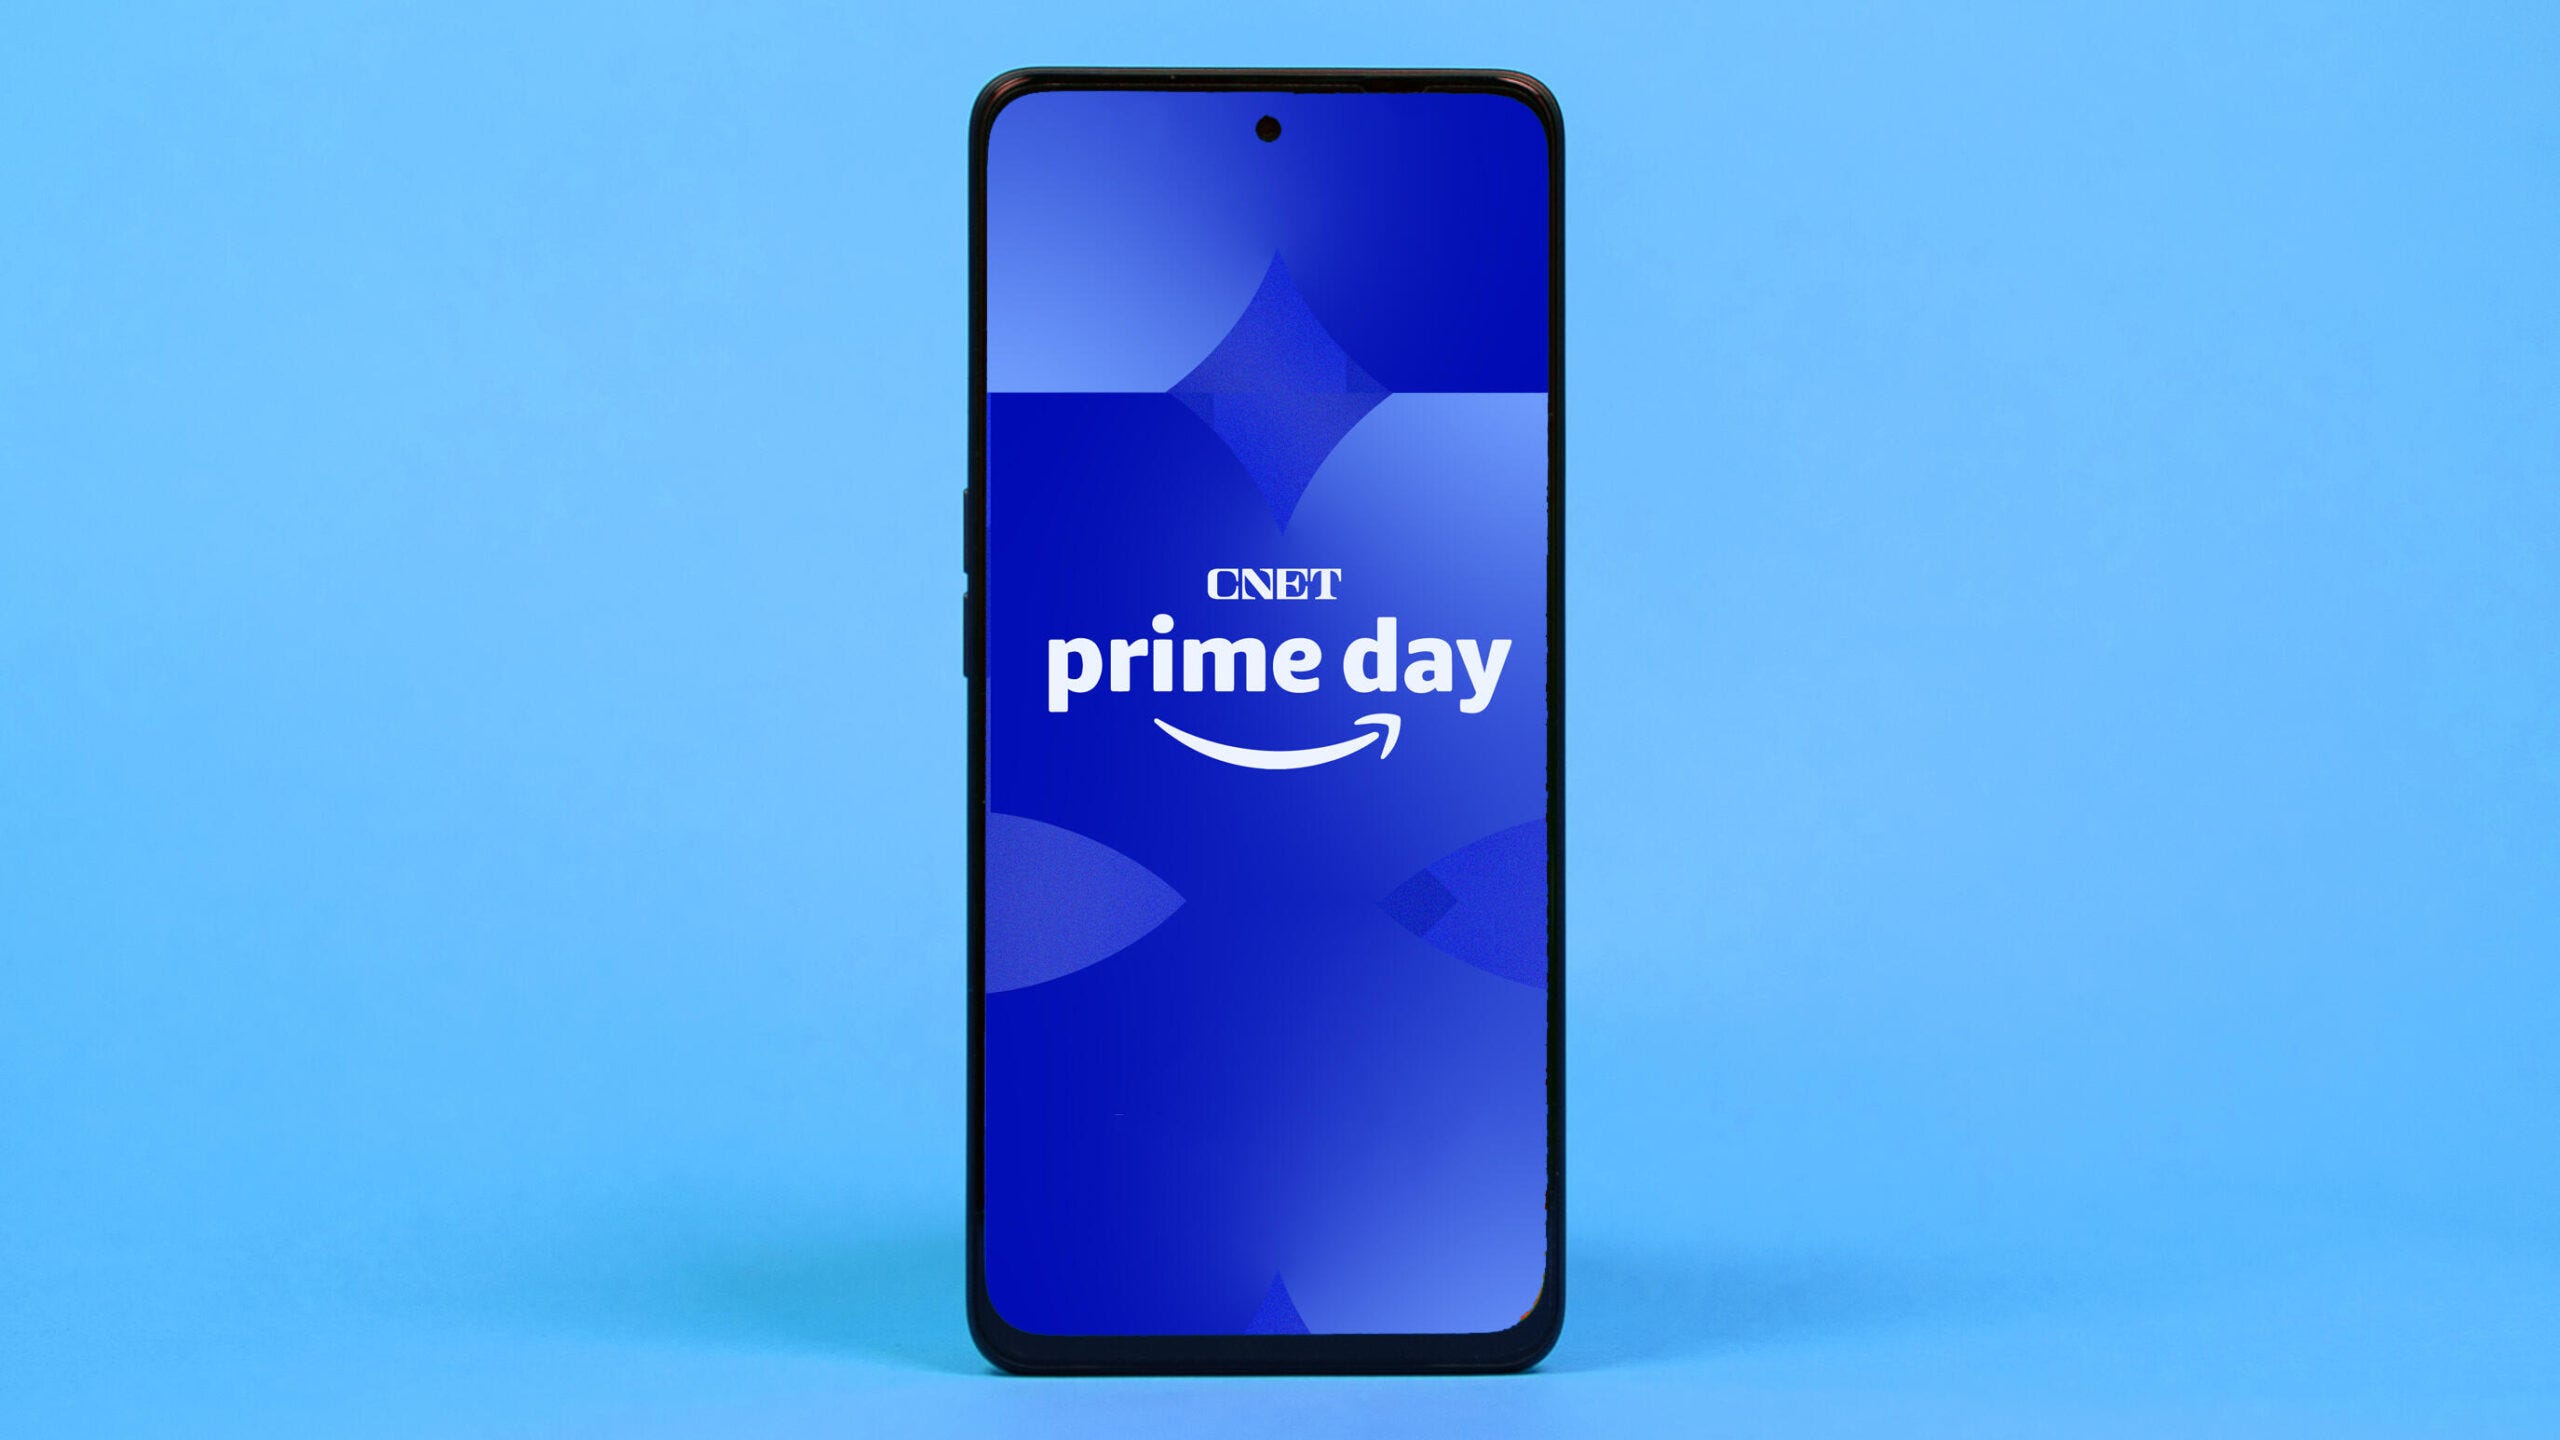 More features coming to  Prime? - CNET